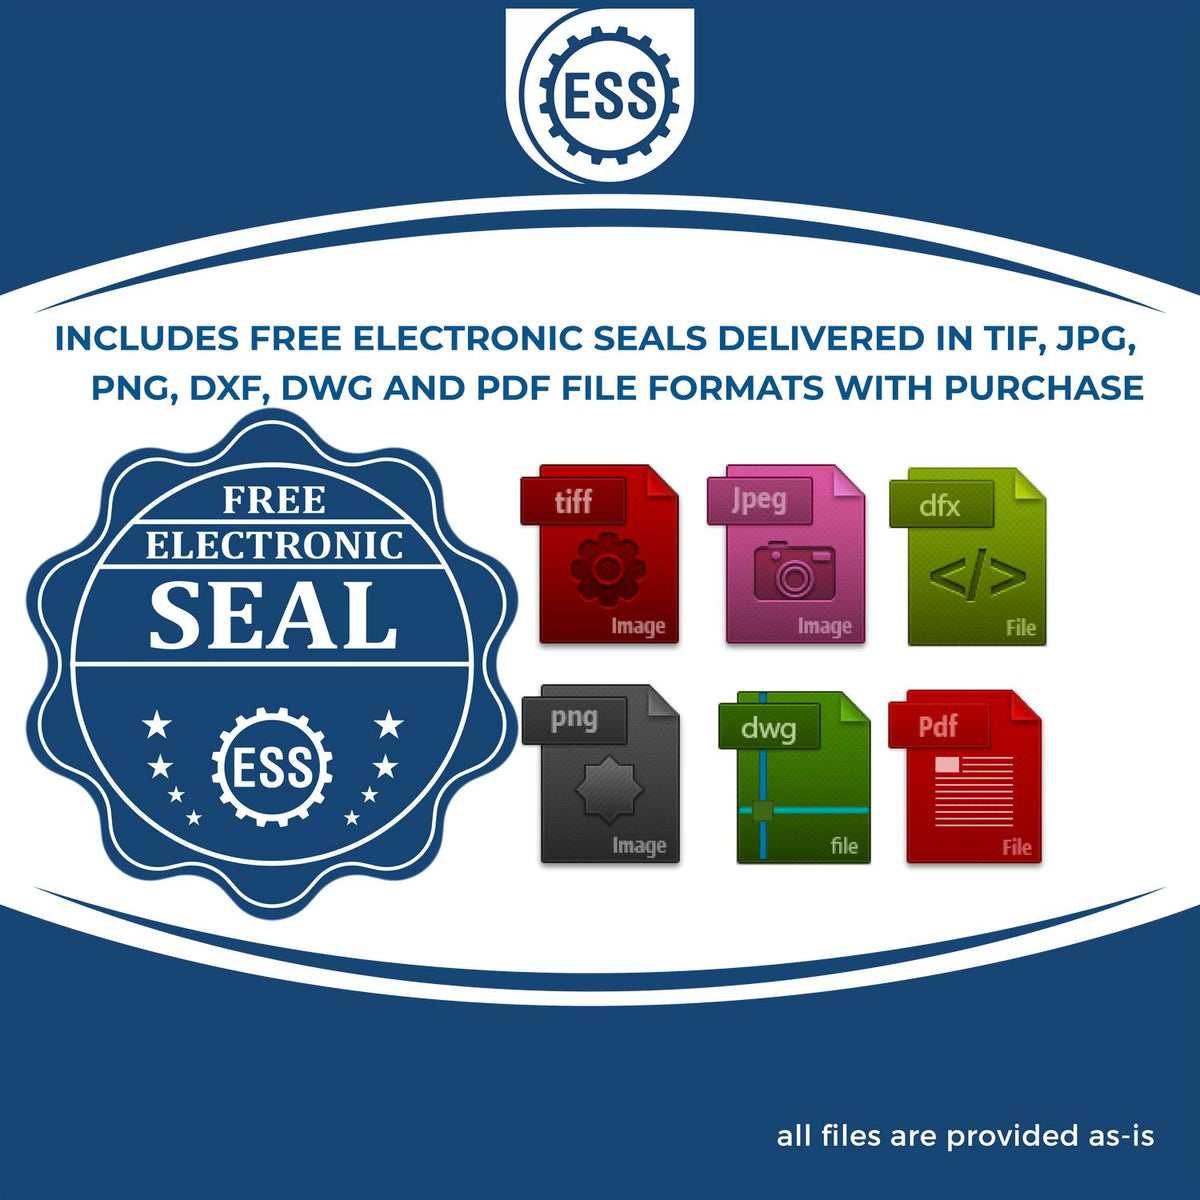 An infographic for the free electronic seal for the Soft Colorado Professional Geologist Seal illustrating the different file type icons such as DXF, DWG, TIF, JPG and PNG.